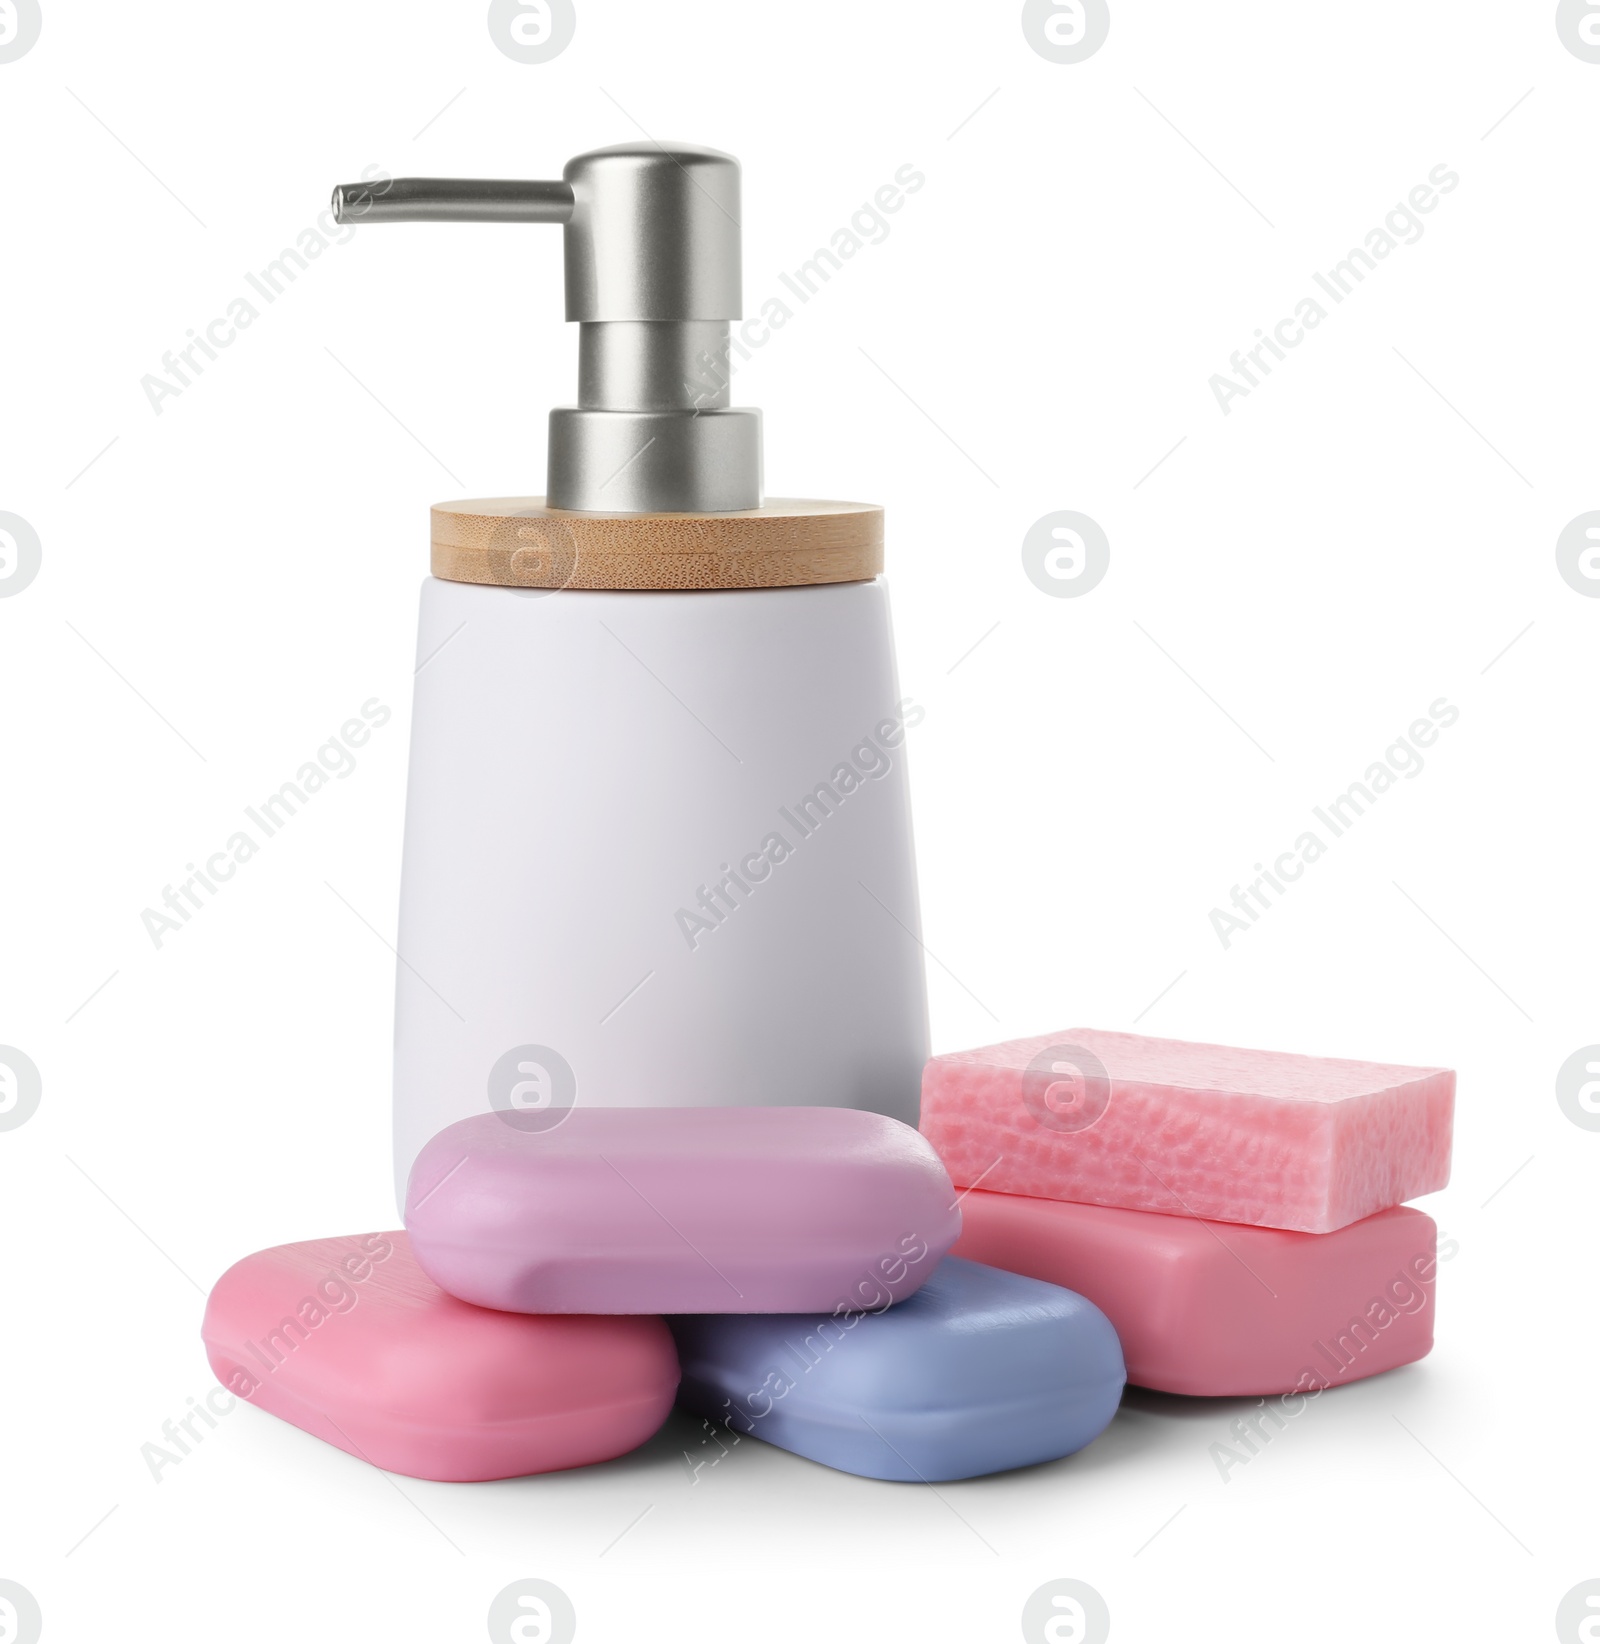 Photo of Soap bars and dispenser on white background